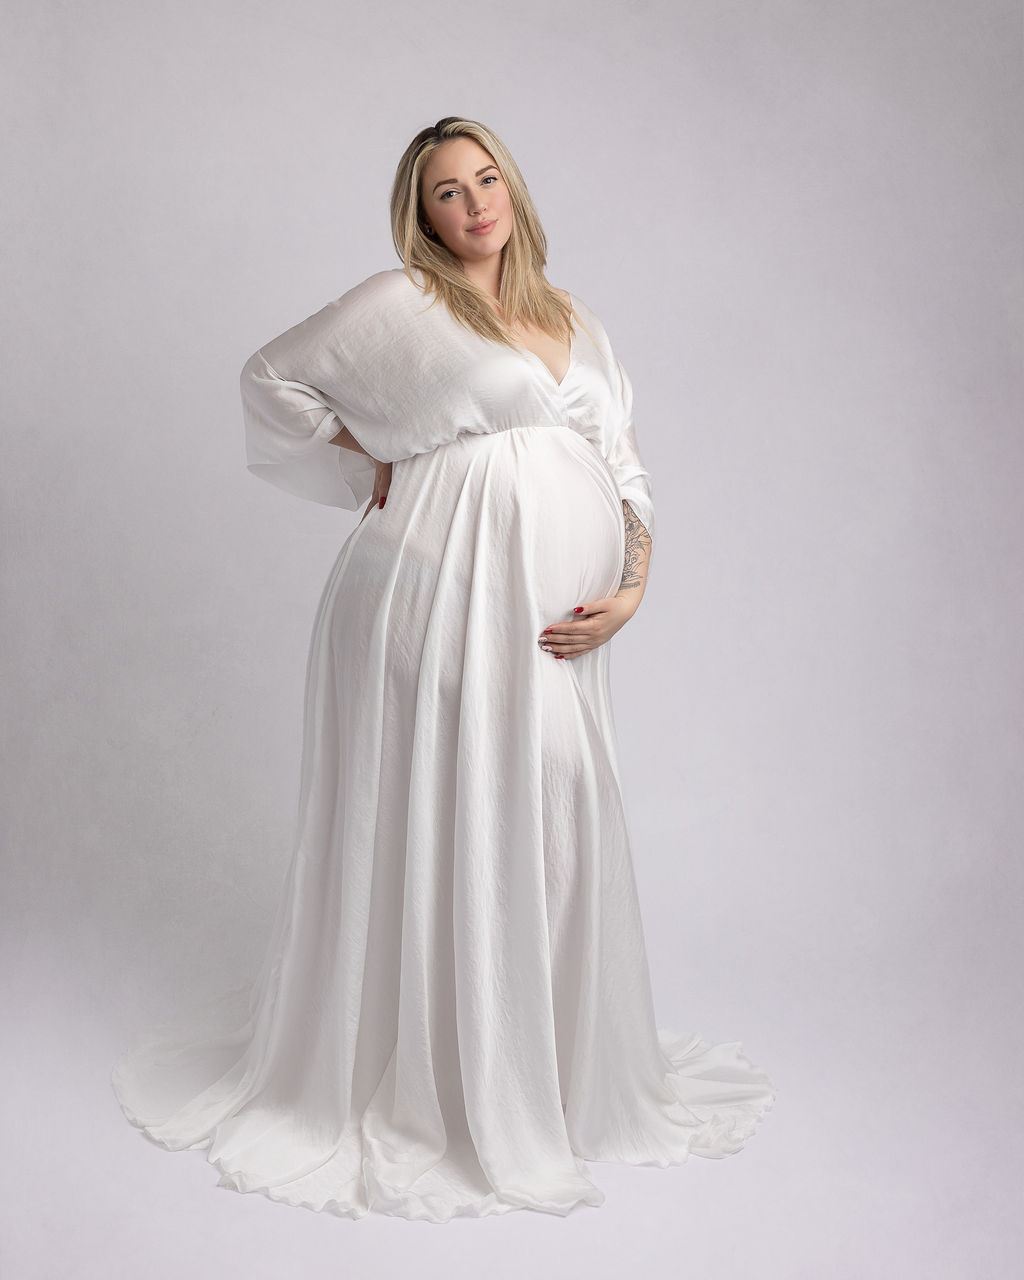 mom to be in white maternity gown cradling her bump St. Charles Birthing Center